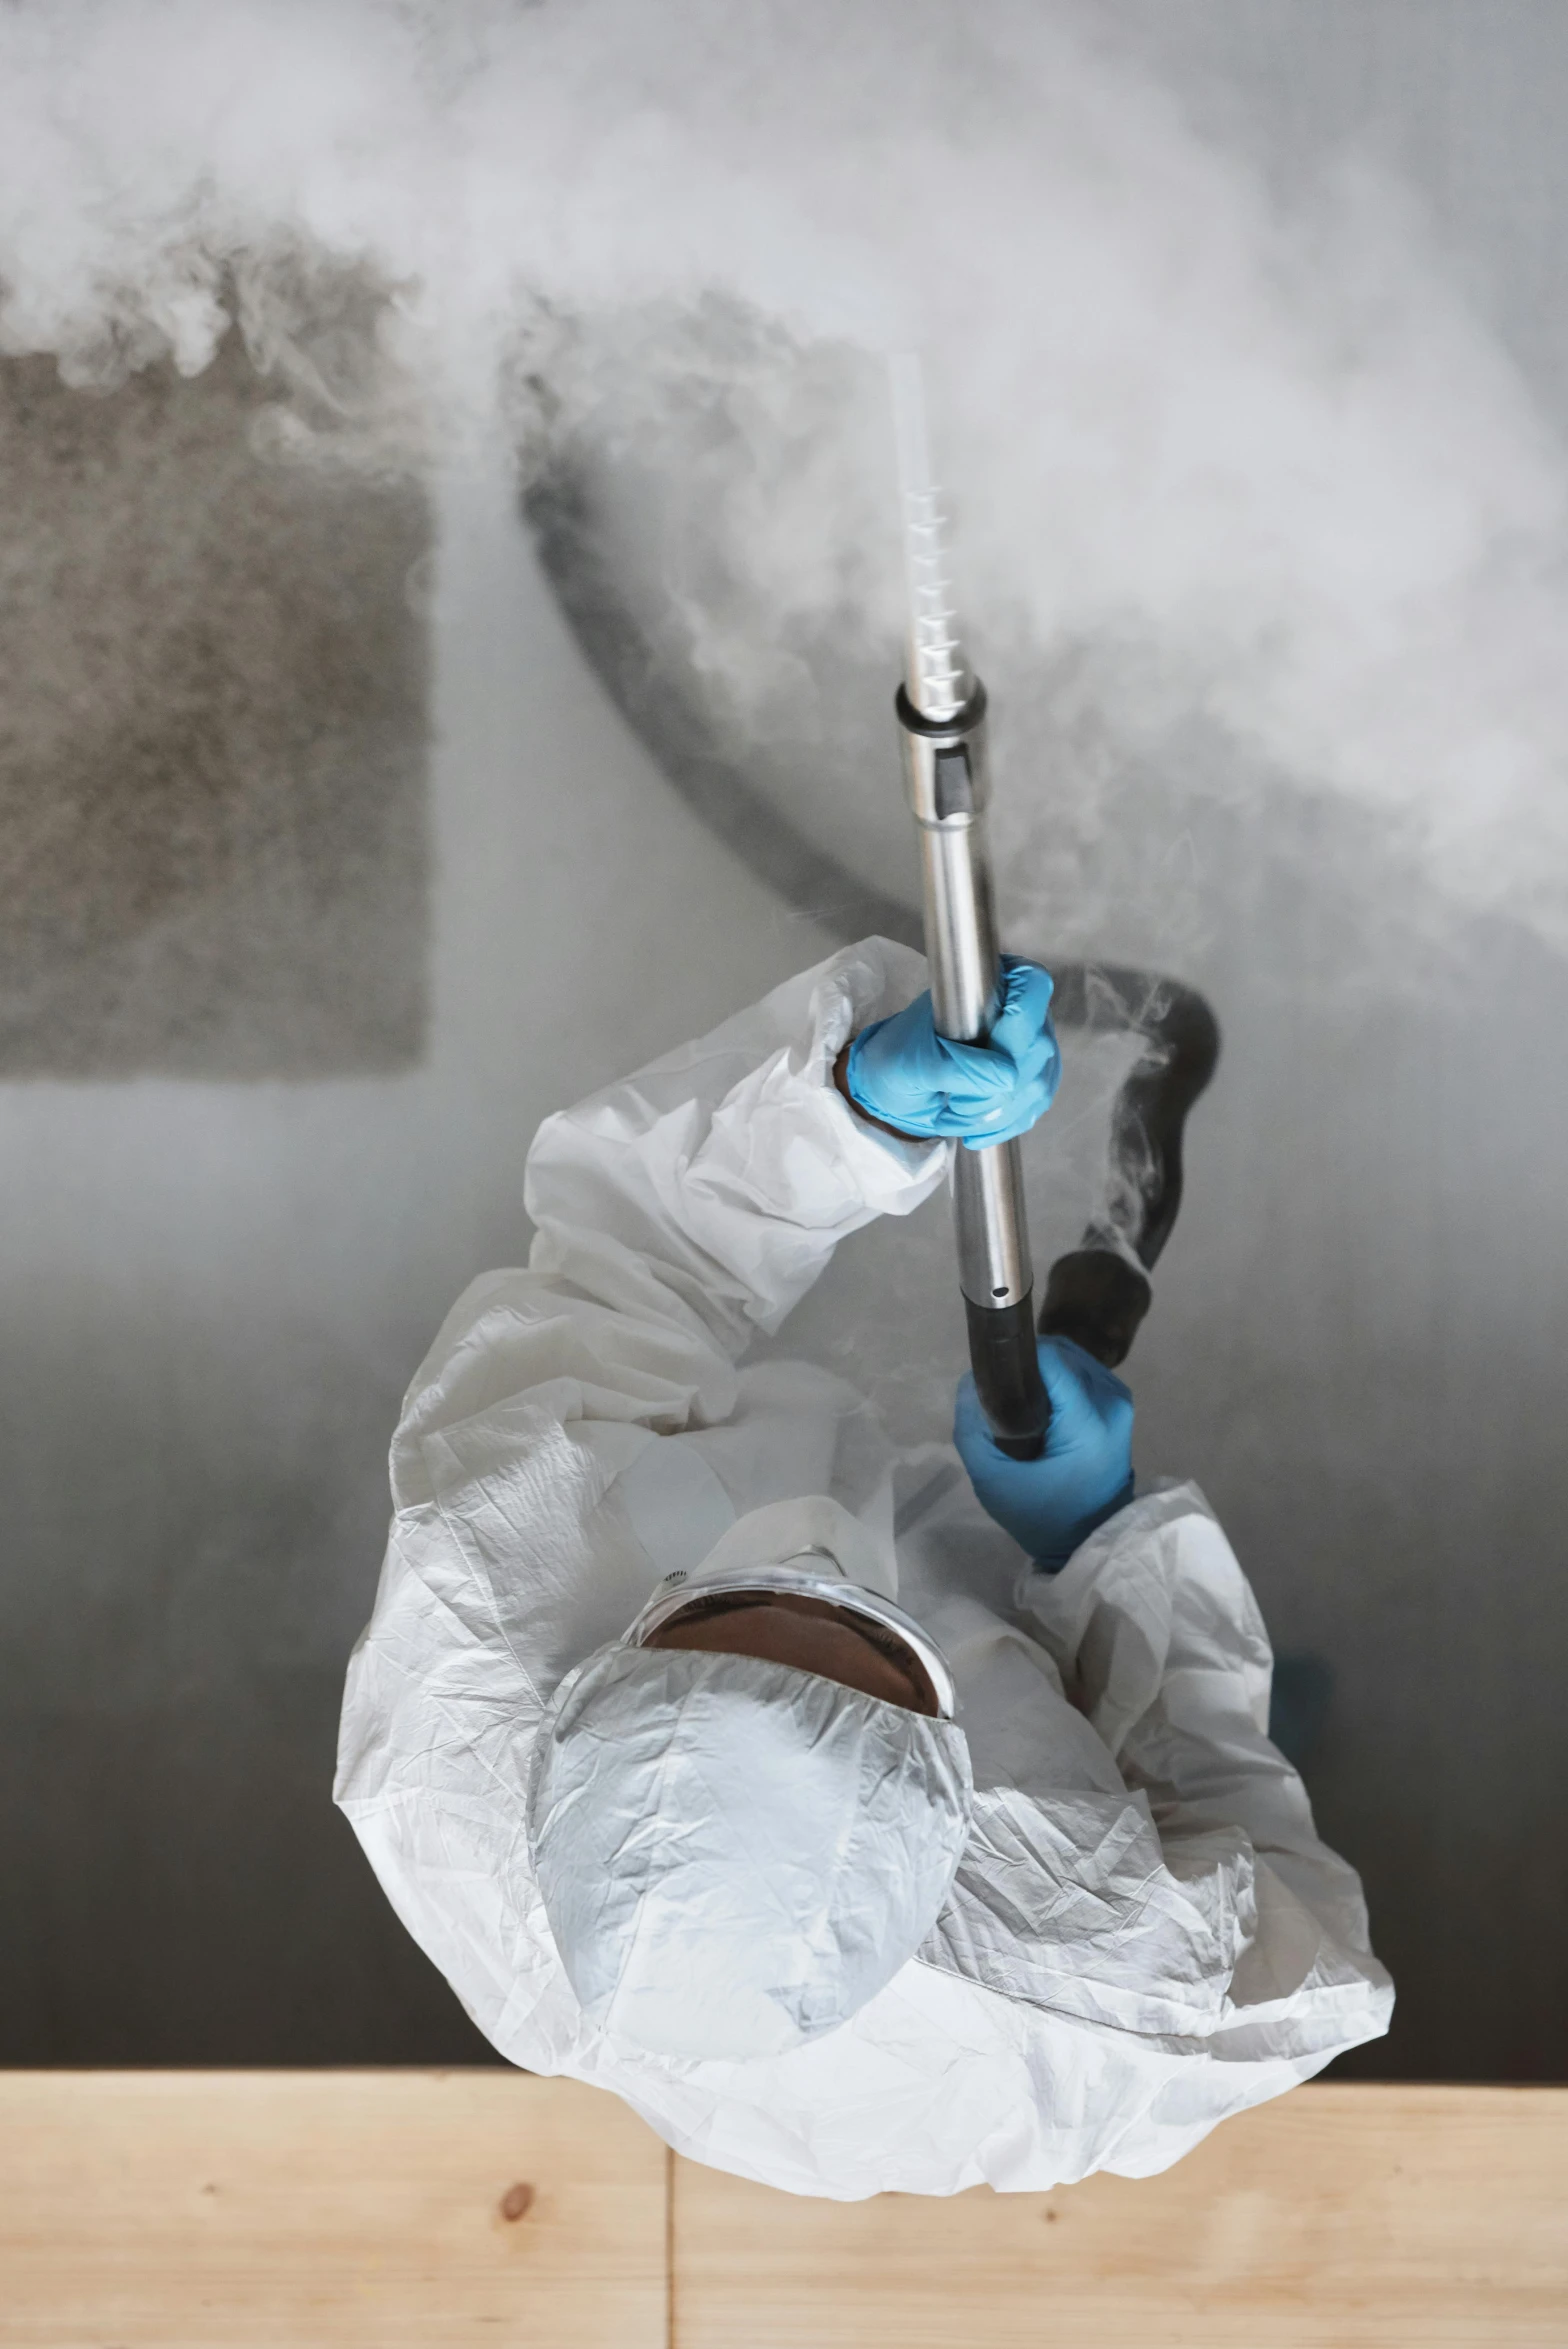 a person spraying something with a spray gun, by Ben Zoeller, shutterstock, process art, cryogenic pods, smoke filled room, clean medical environment, gray